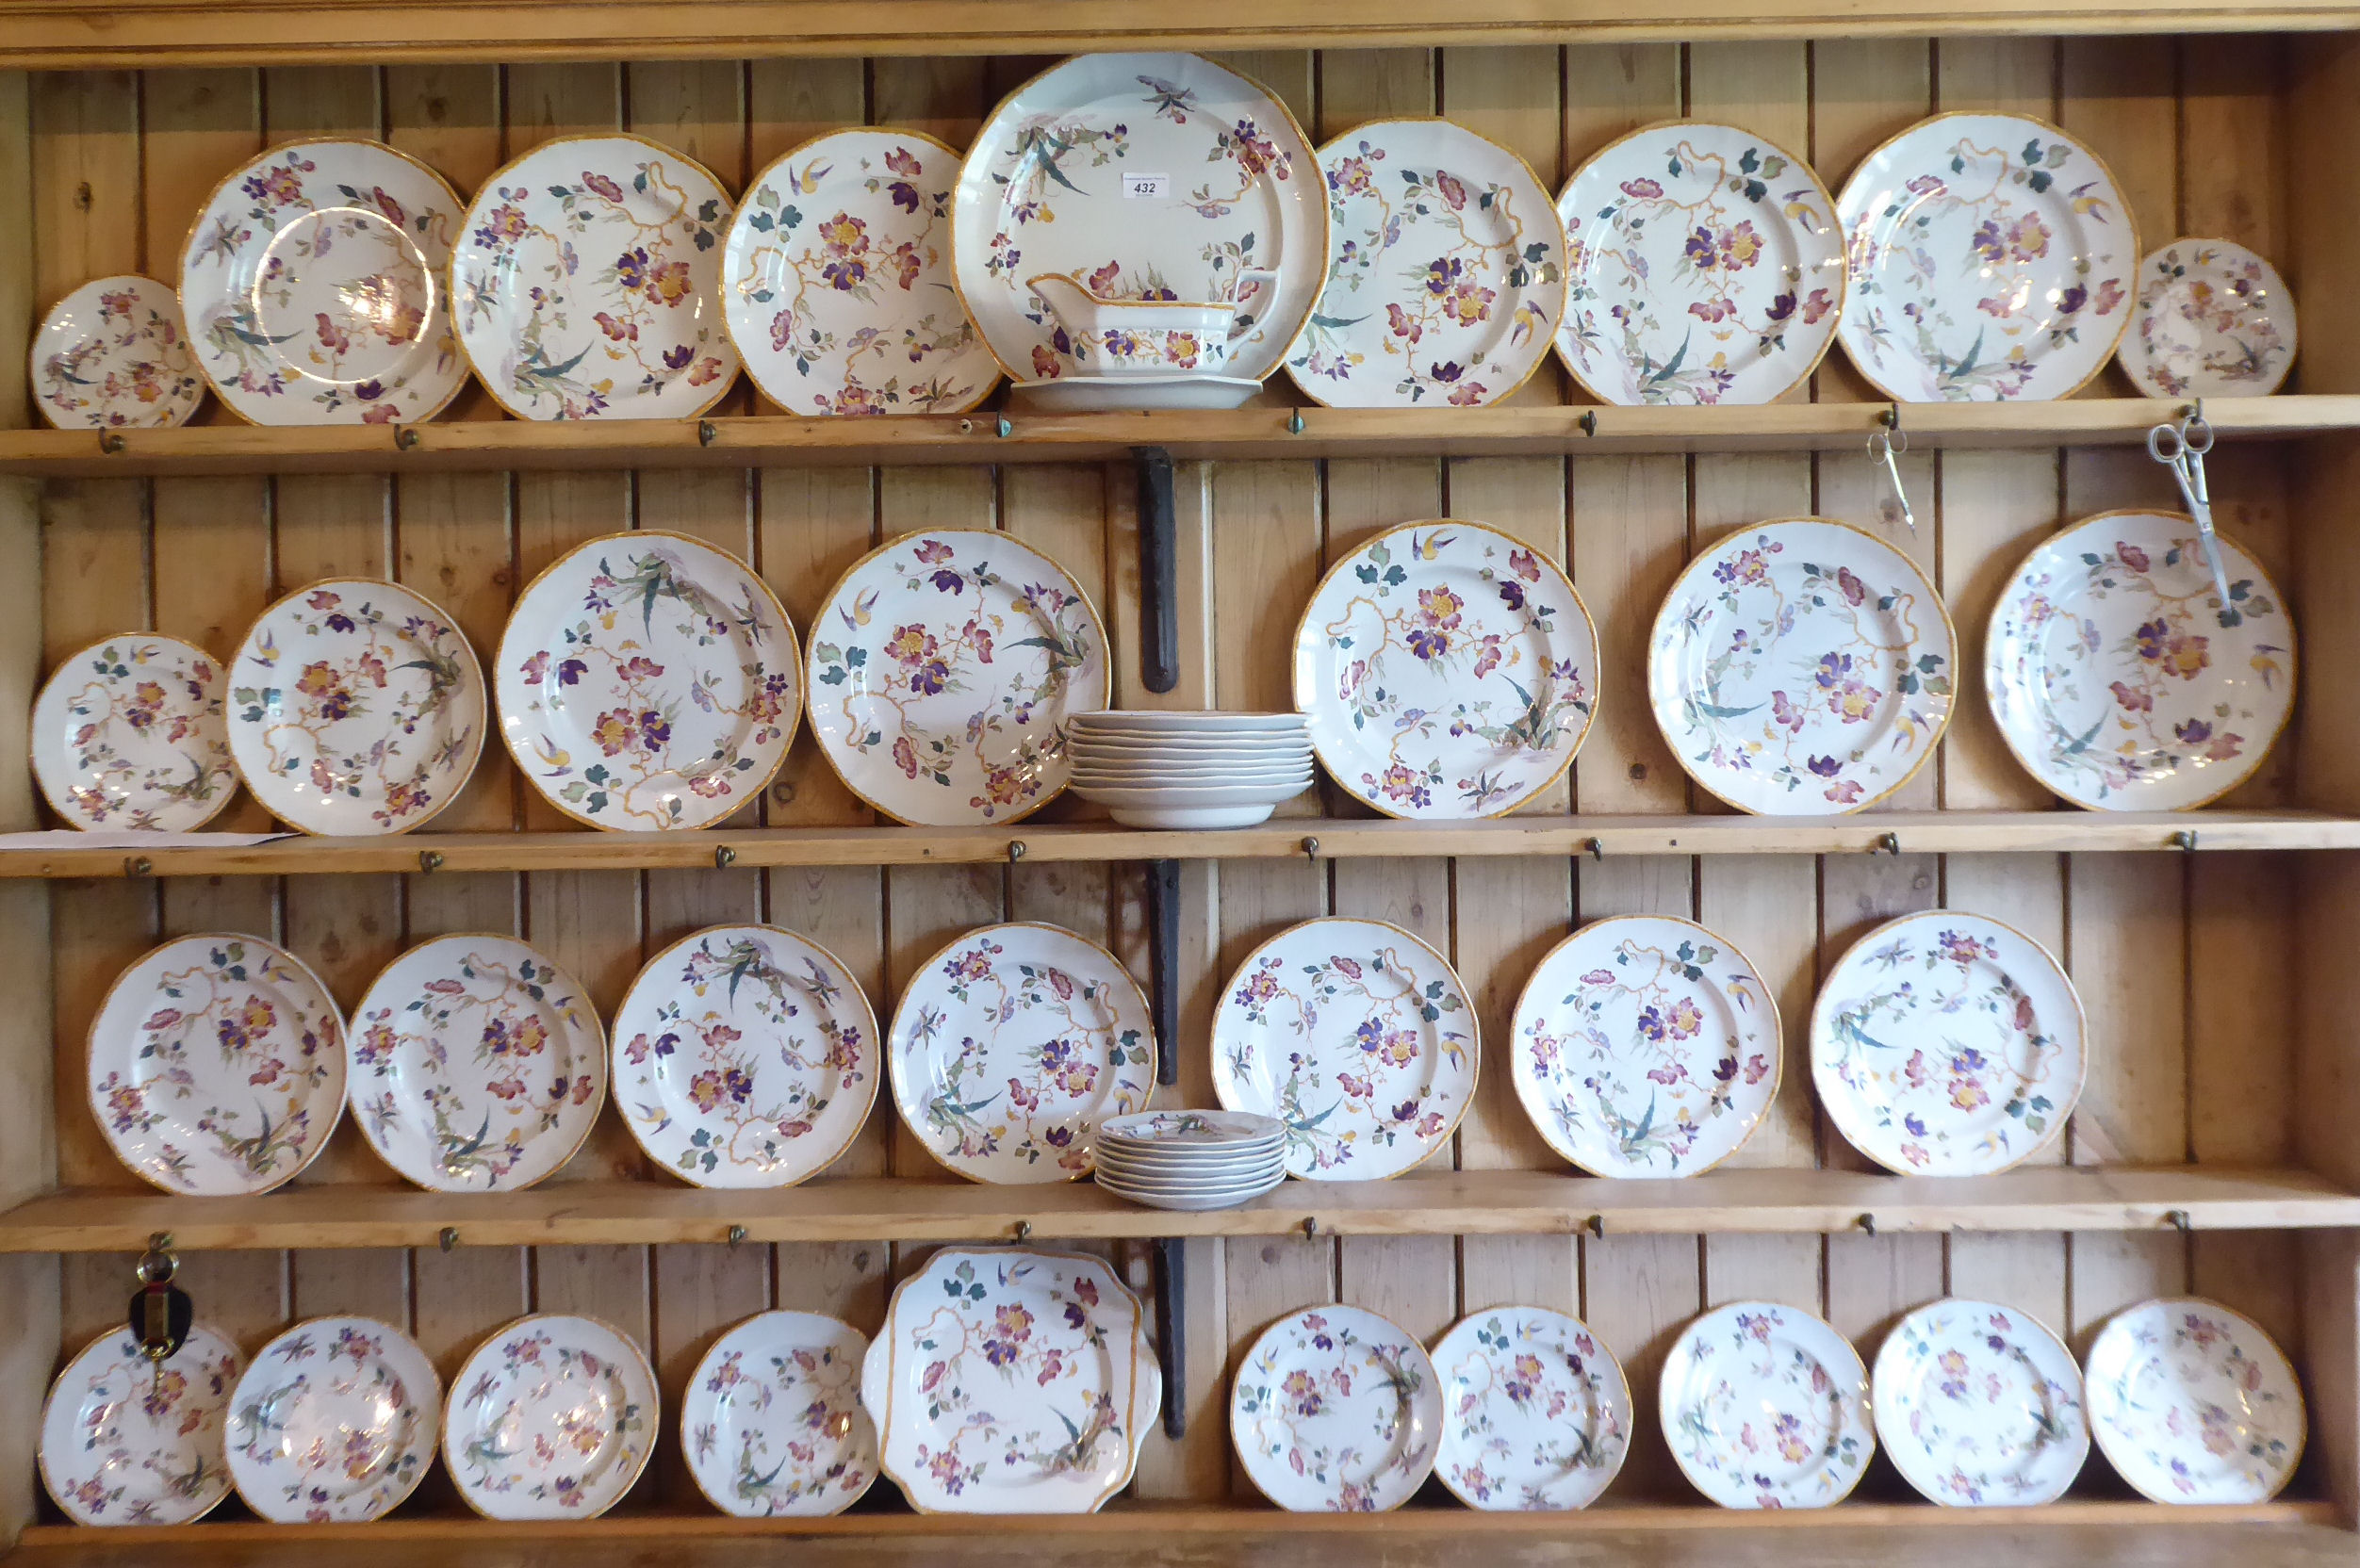 A Wedgwood china Devon Rose pattern dinner service (From the Ian Thomas Estate Sale)